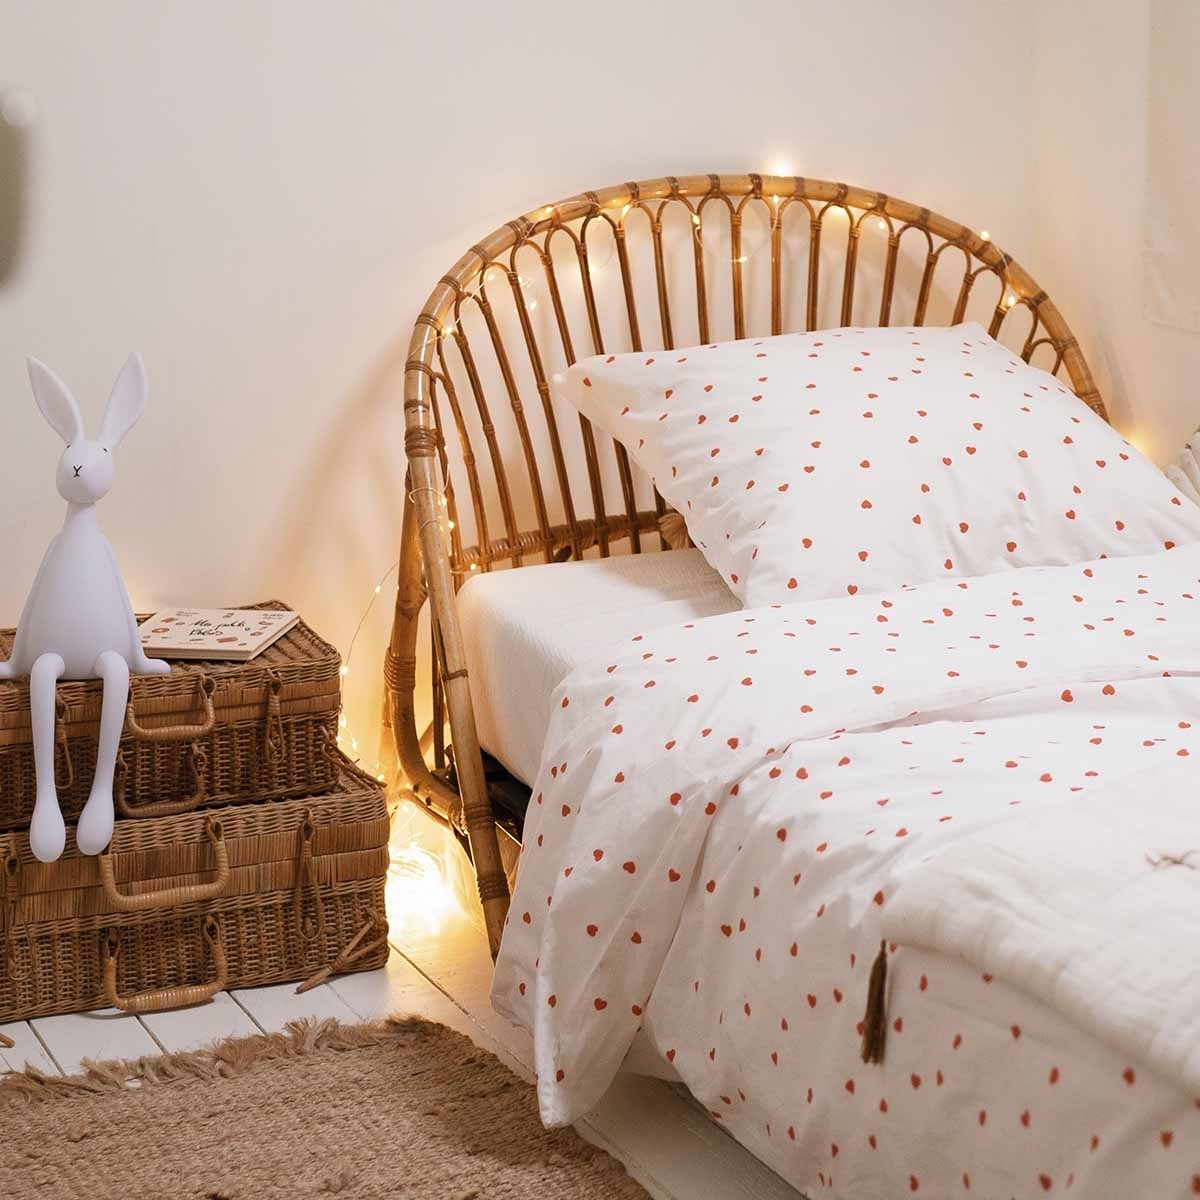 Housse de couette Spring 90x200 Vipack Bedcovers - Rose - Linge de  lit/Housse de couette - tendresse de bébé